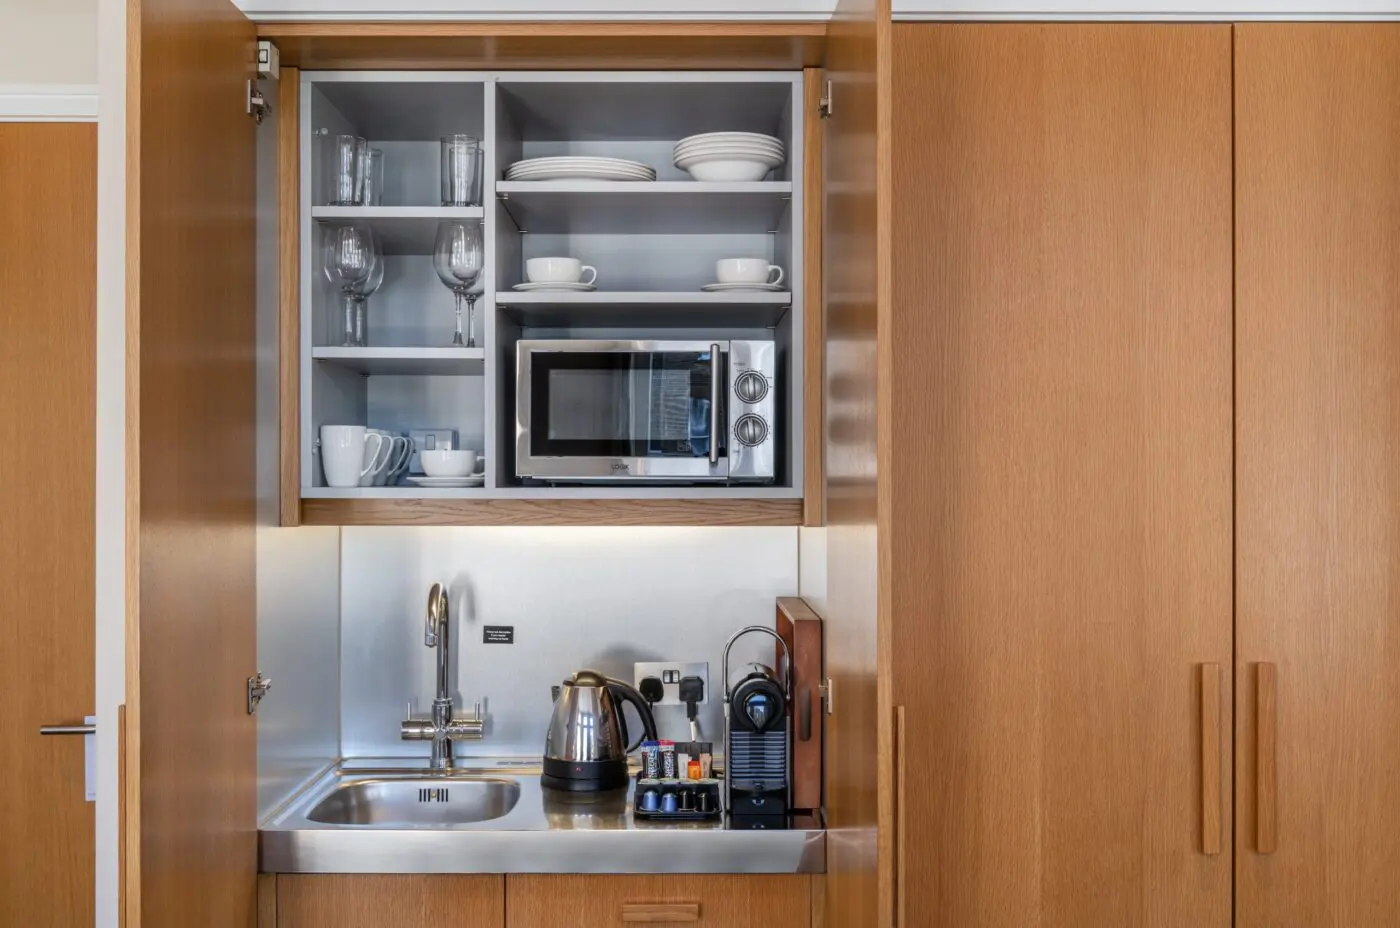 A miniature kitchen, with a built in fridge and microwave, located in Kensington.